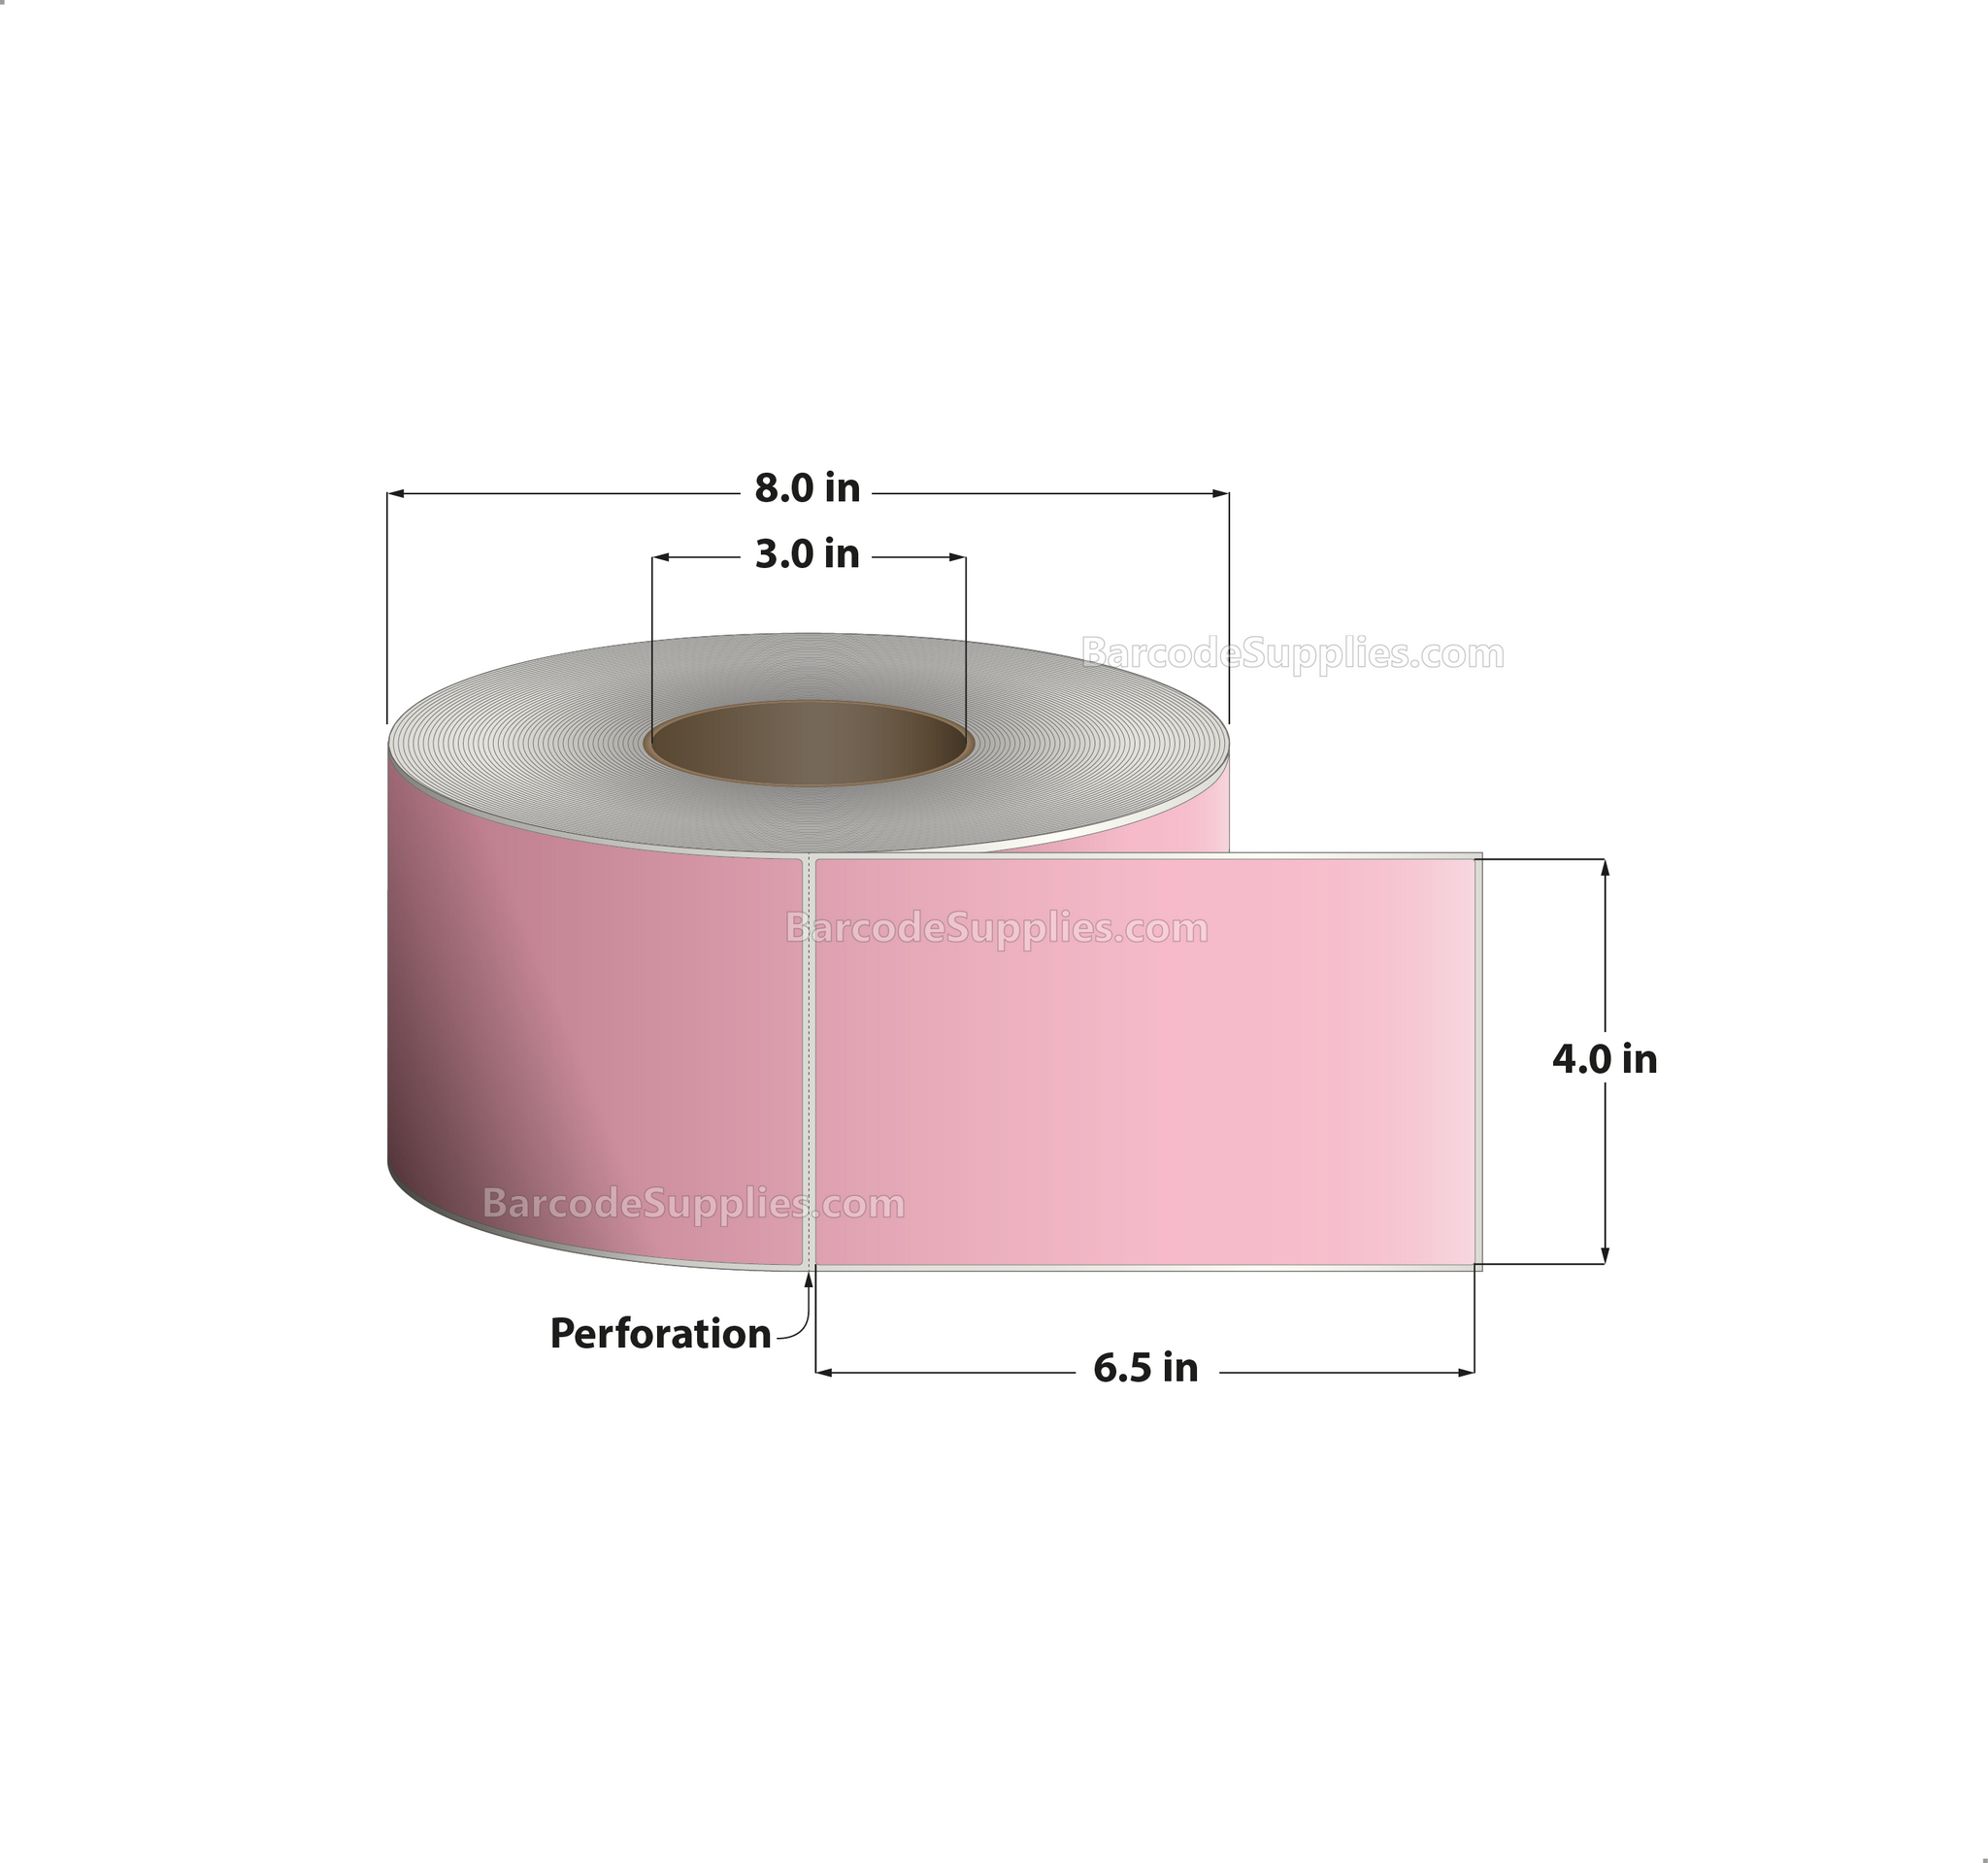 4 x 6.5 Thermal Transfer 196 Pink Labels With Permanent Acrylic Adhesive - Perforated - 900 Labels Per Roll - Carton Of 4 Rolls - 3600 Labels Total - MPN: TH465-1PP